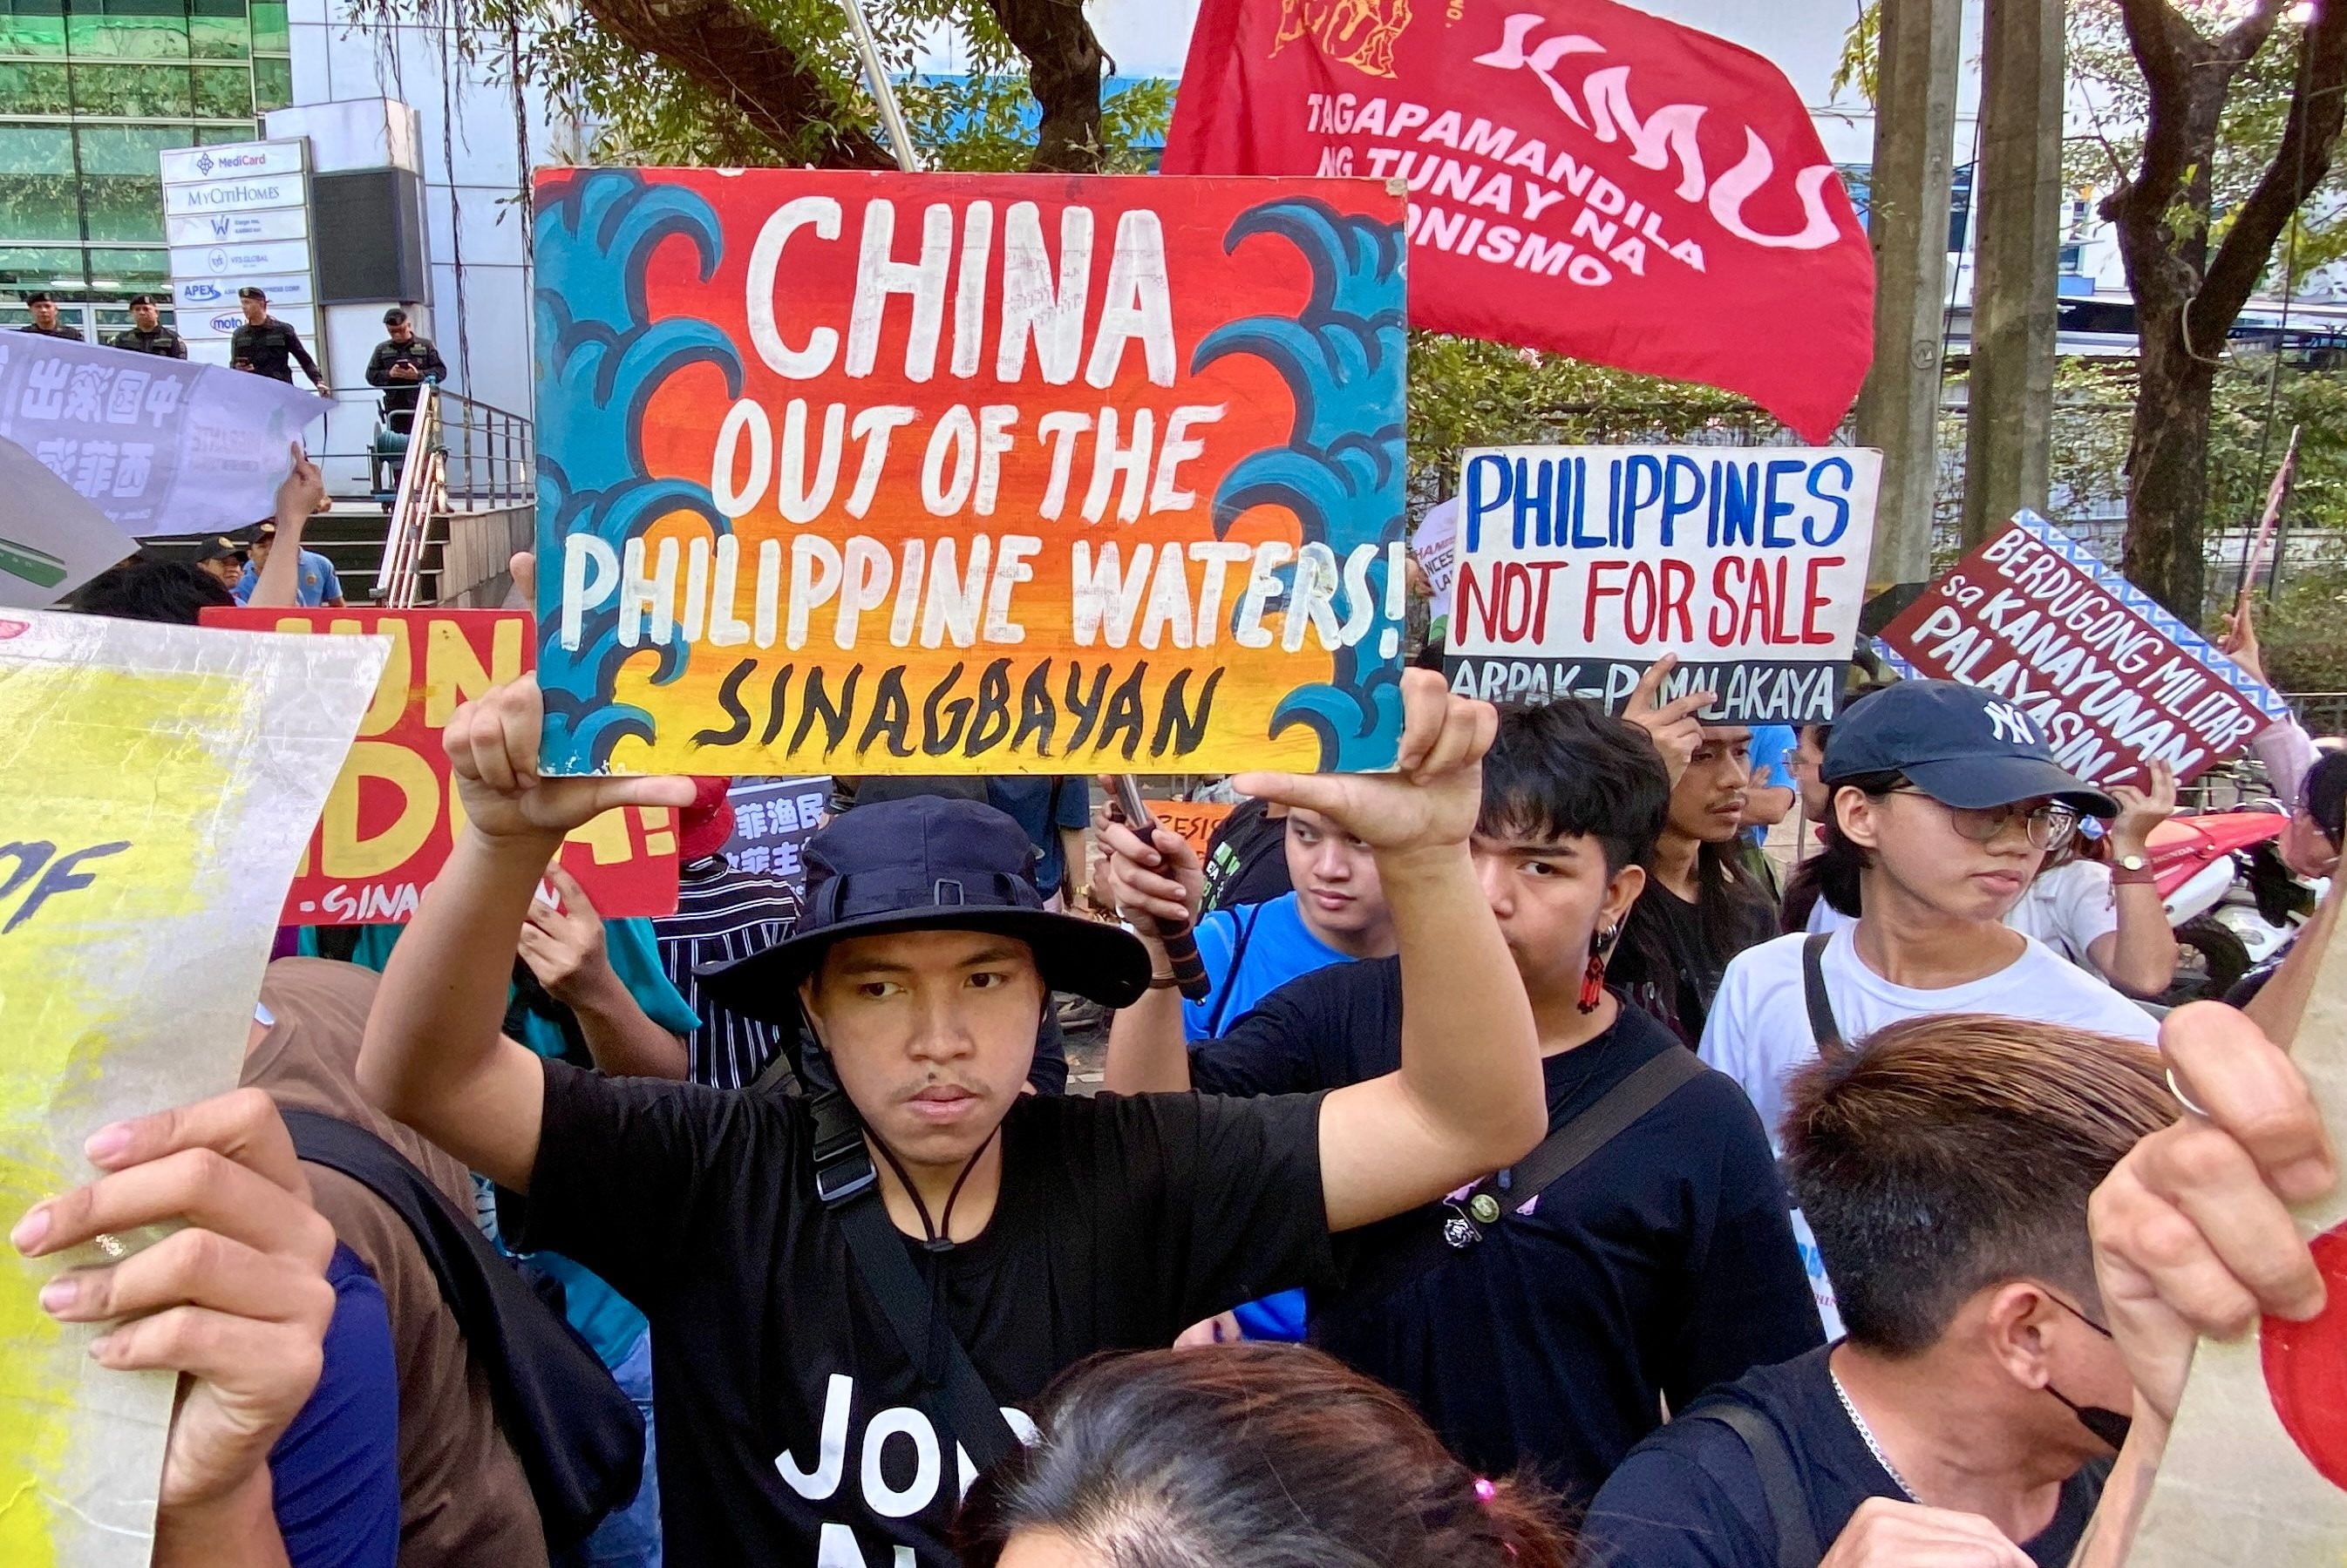 Protesters rally outside the Chinese consular office in Manila to condemn China’s harassment of Filipino fishermen in the South China Sea. Photo: EPA-EFE